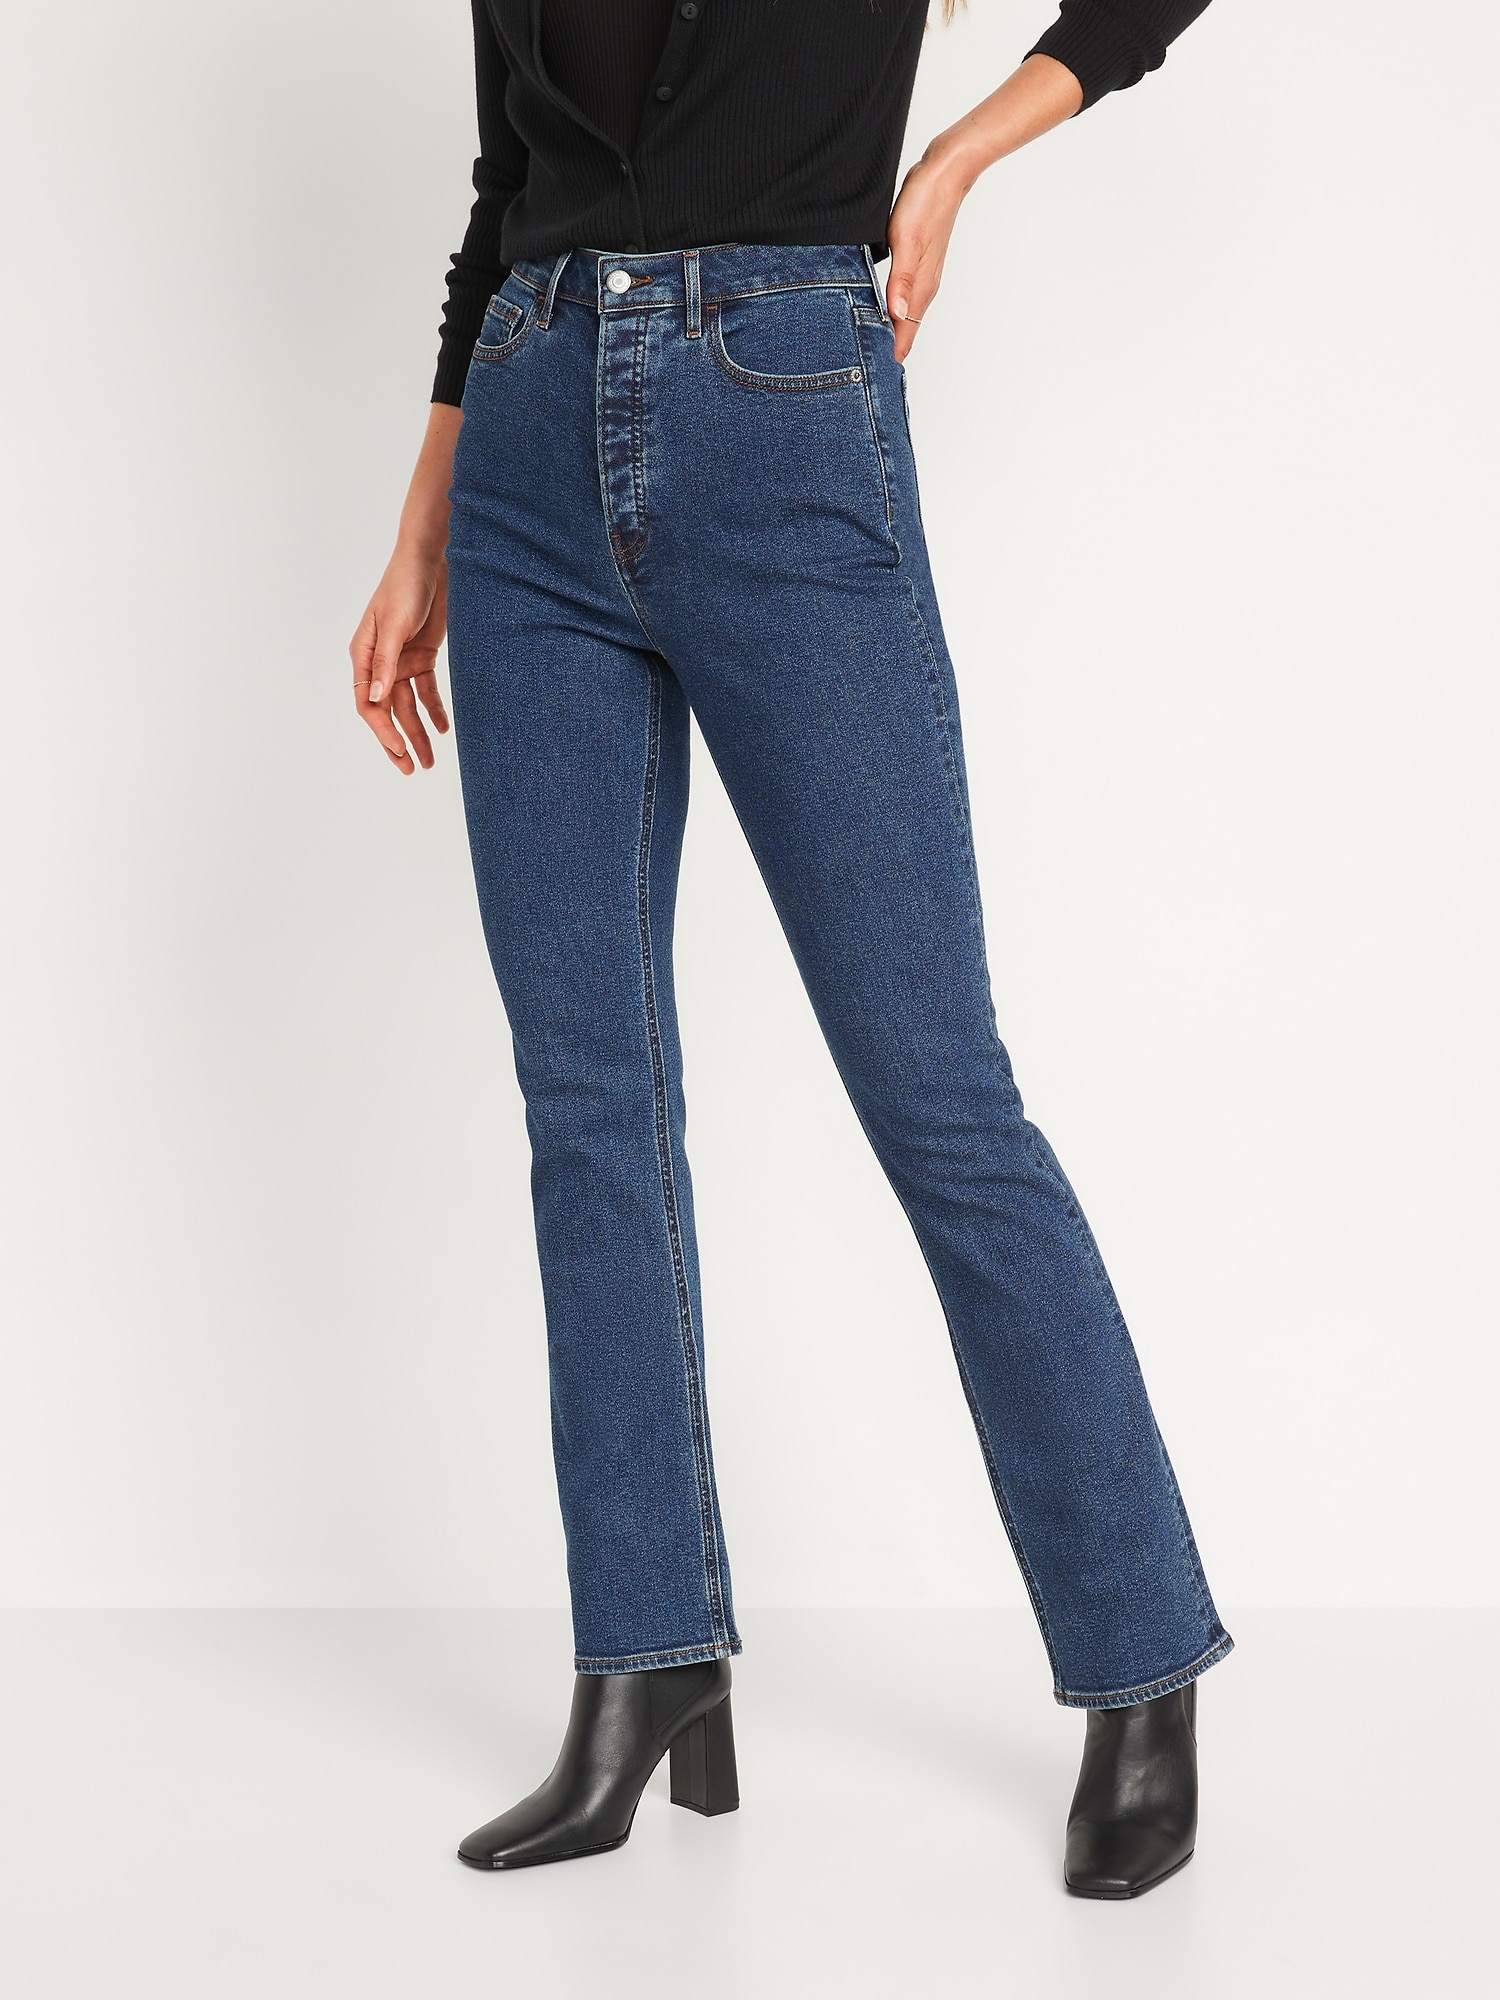 Old Navy Extra High-Waisted Button-Fly Kicker Boot-Cut Jeans for Women blue. 1